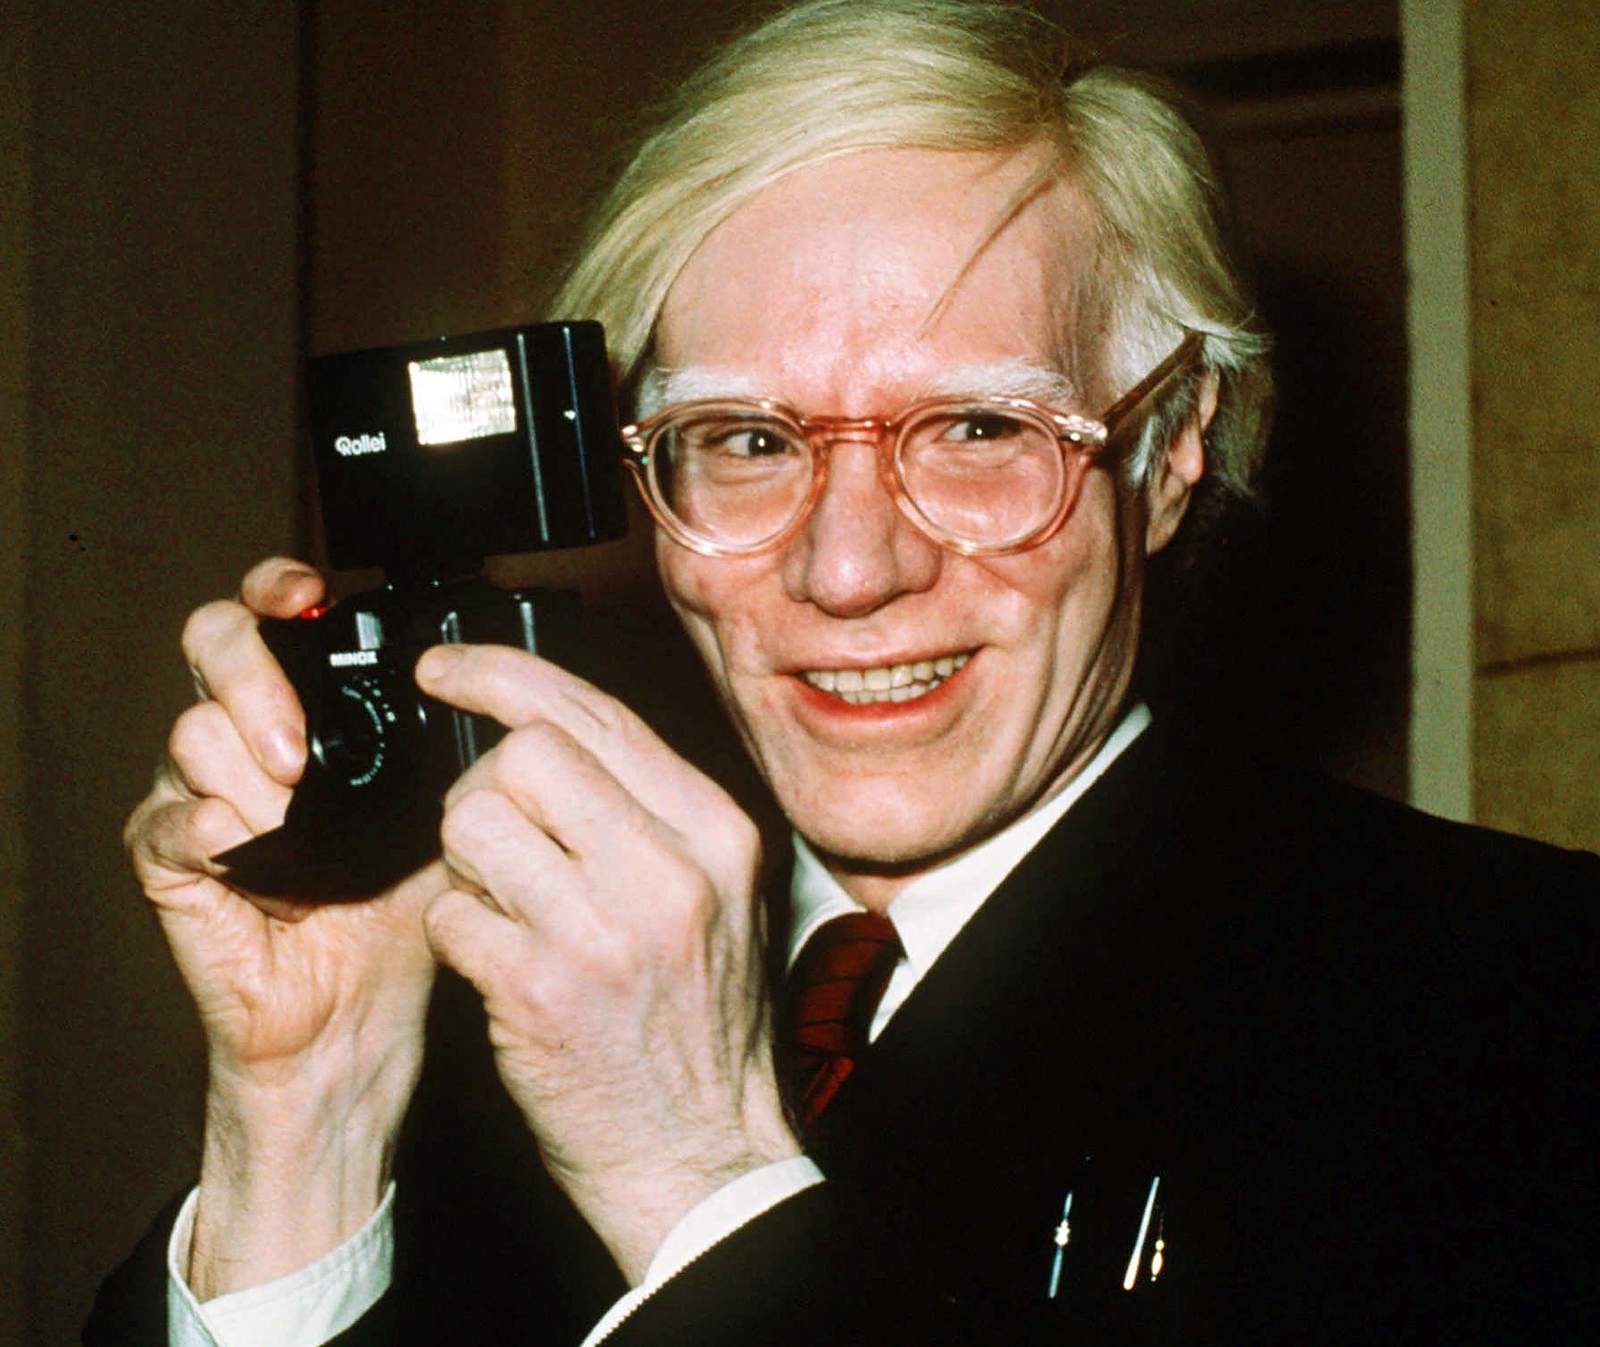 US court sides with photographer in fight over Warhol art